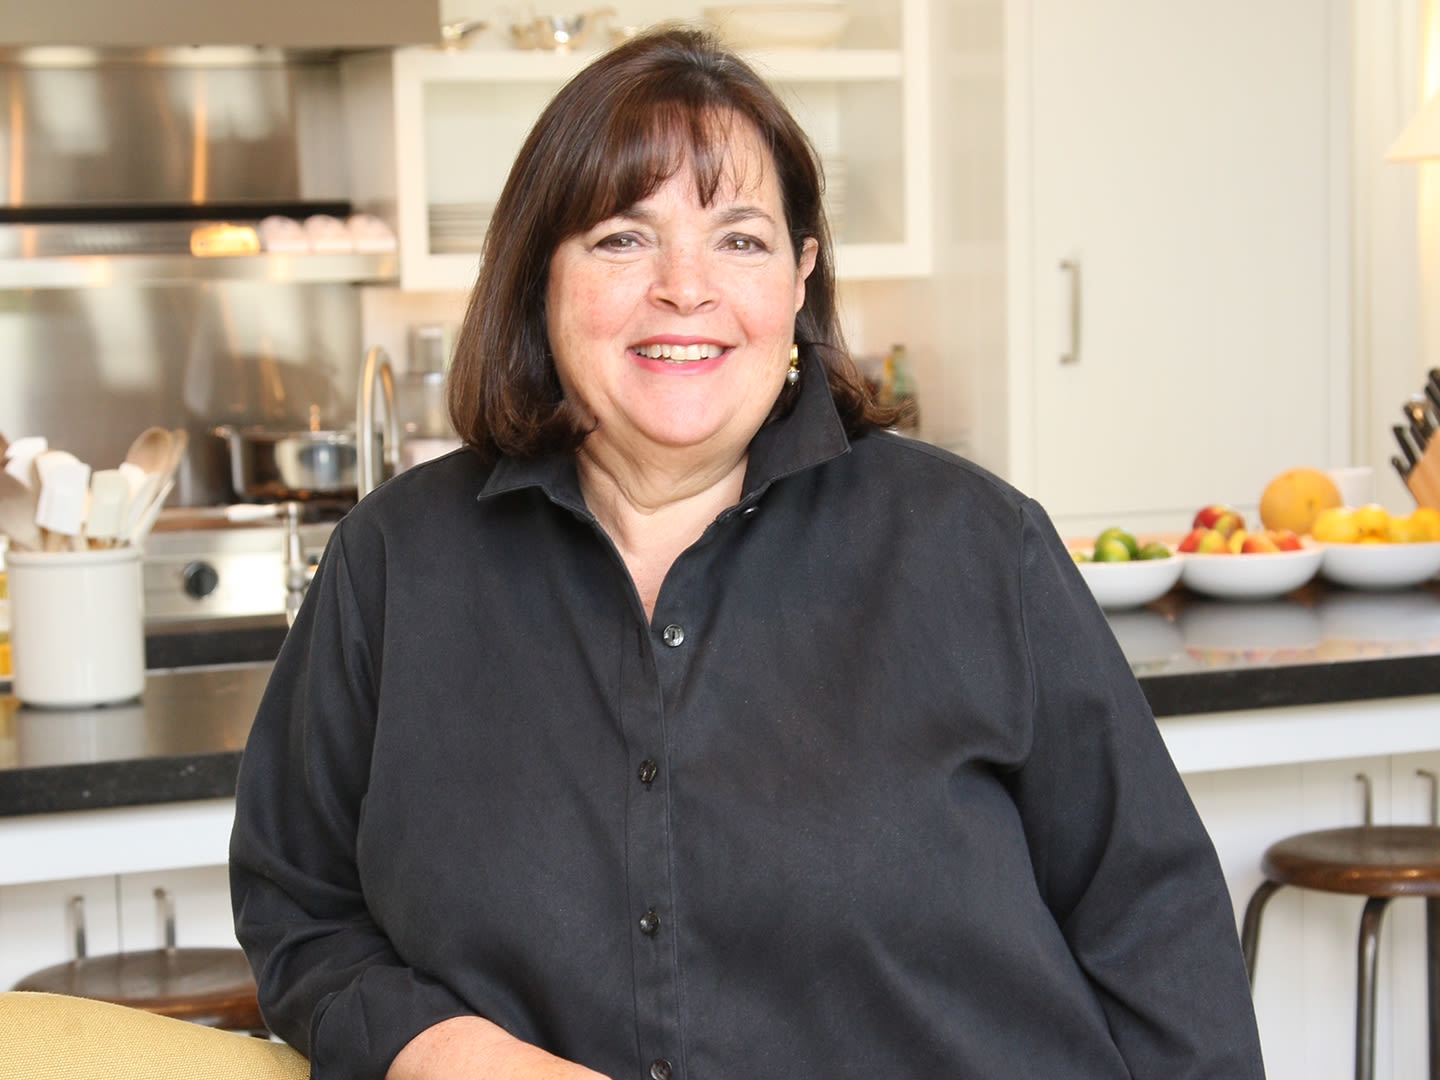 Ina Garten's Secret to Transforming a 'Good Burger Into a Great Burger' Is This Easy-to-Make Topping